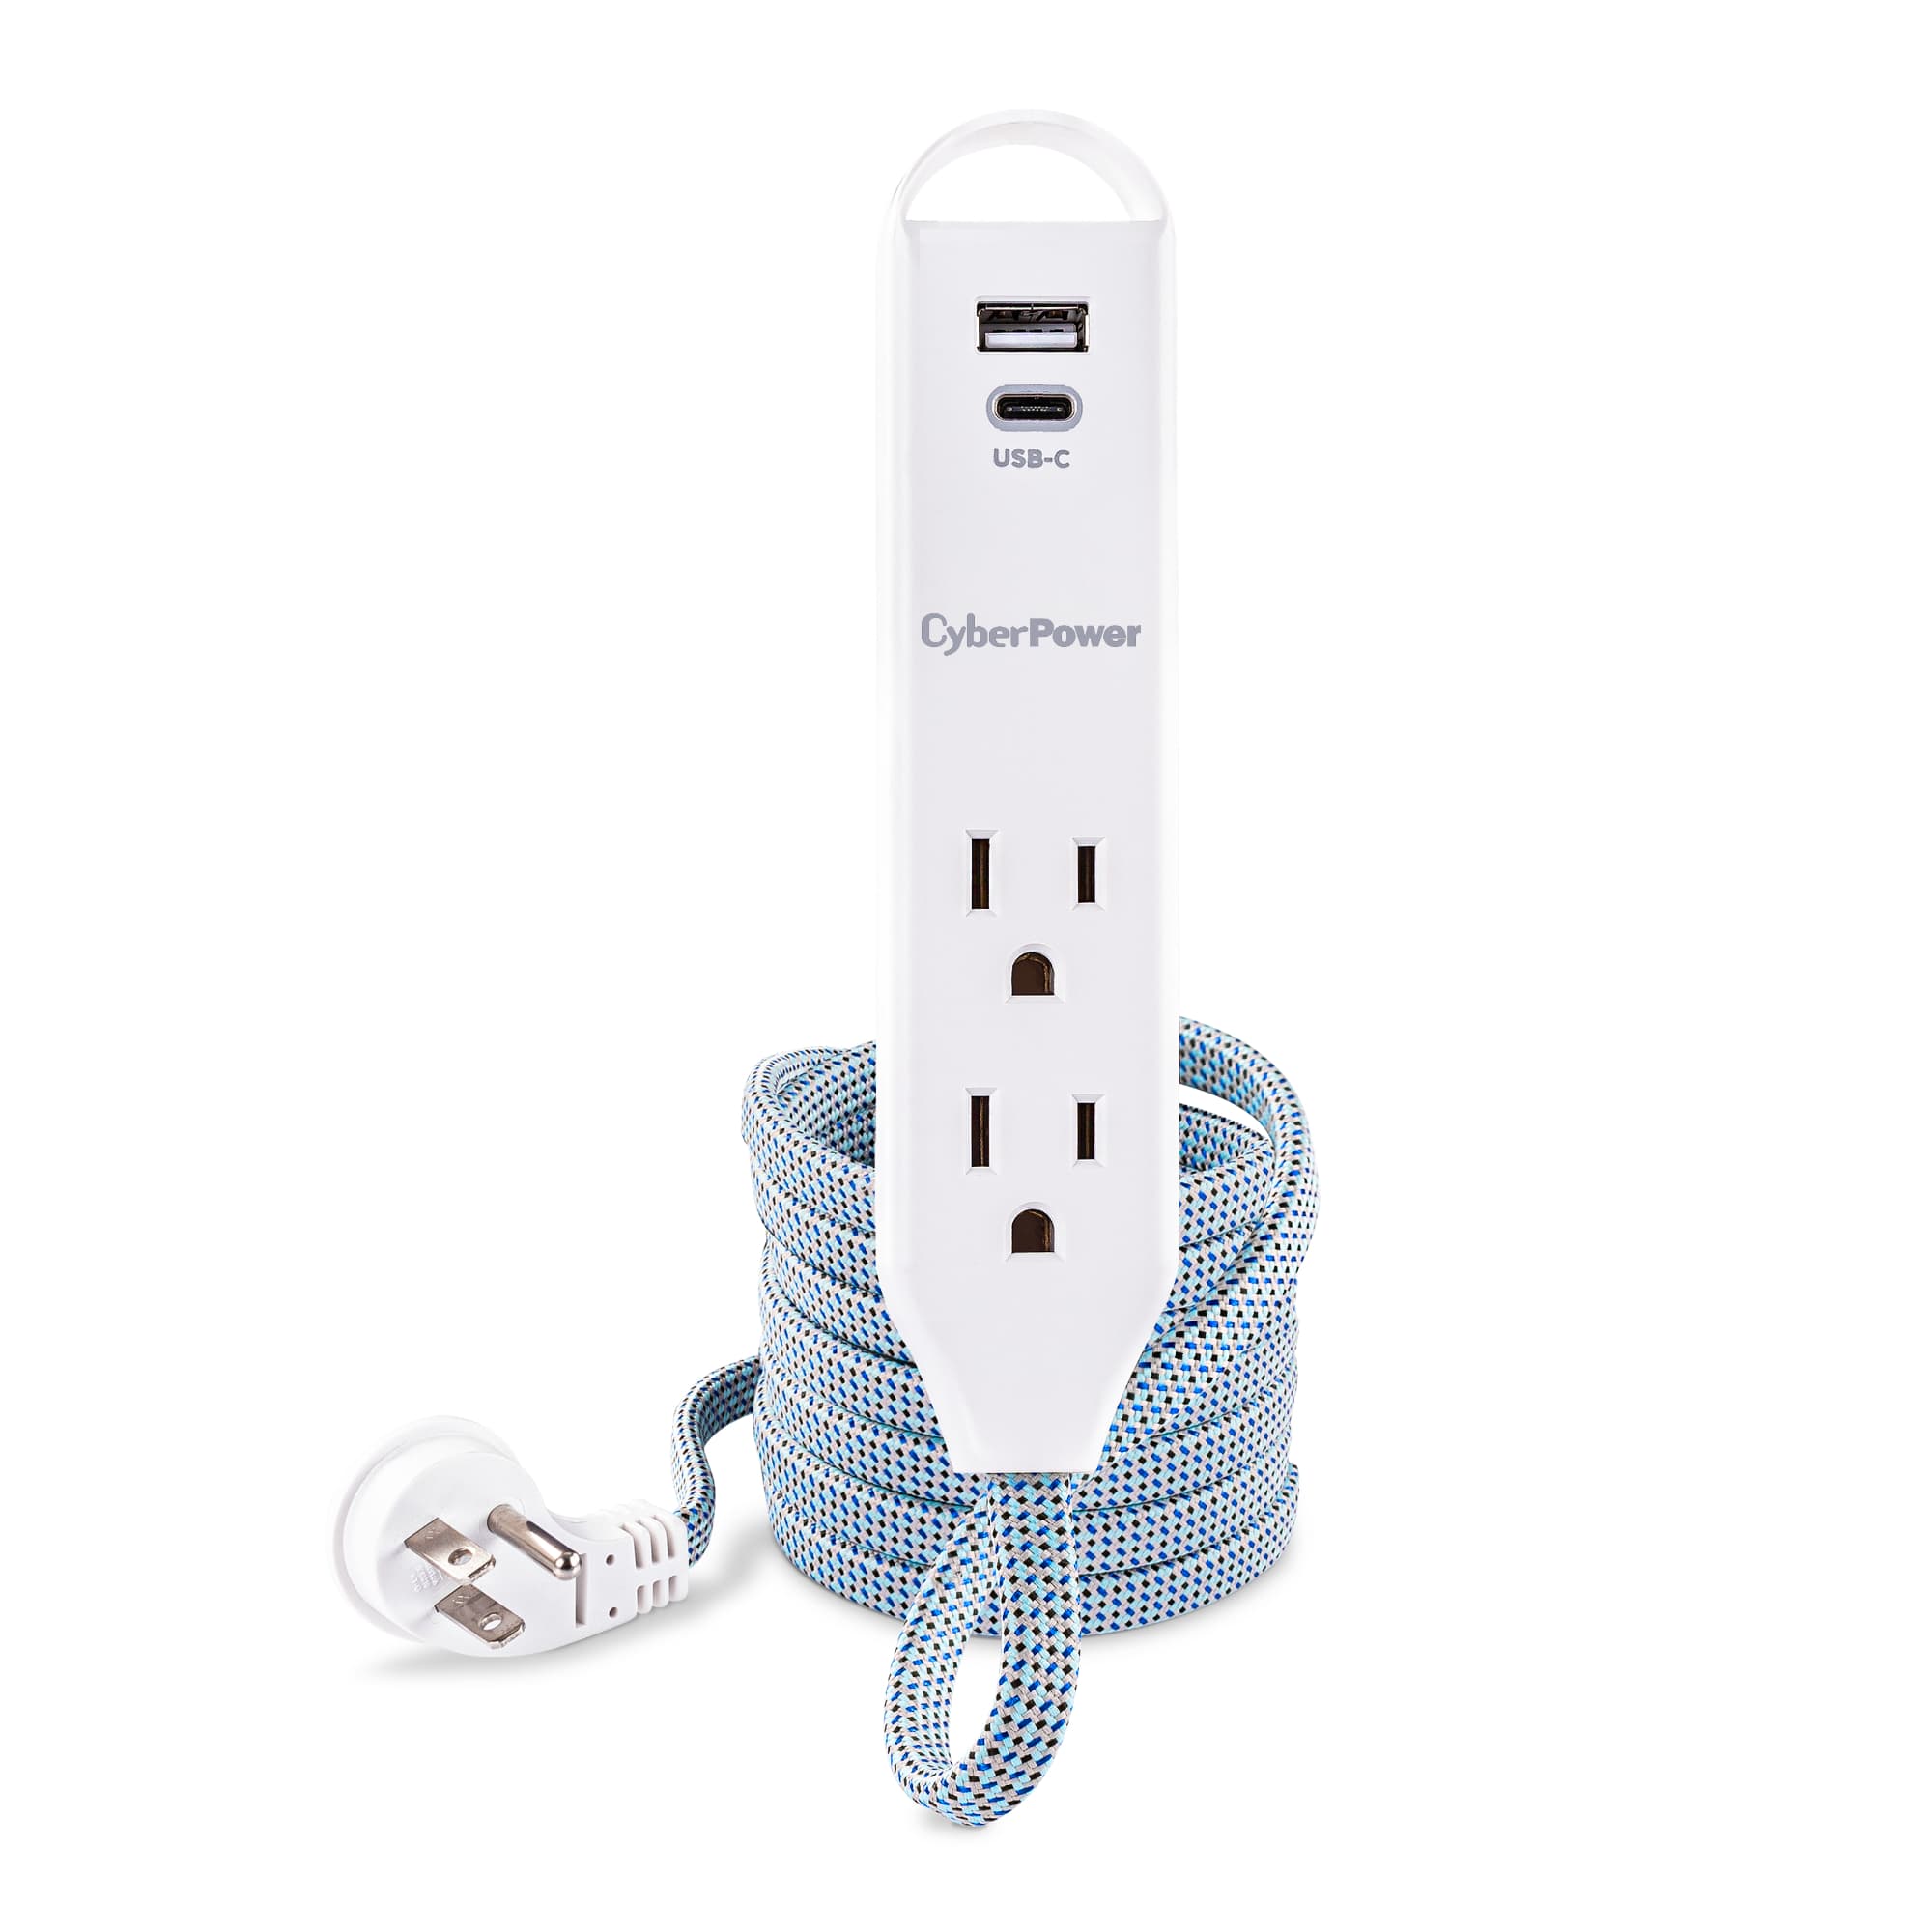 CyberPower GC305UCB 3 Outlet Ext Cord Surge with USB - image 1 of 9